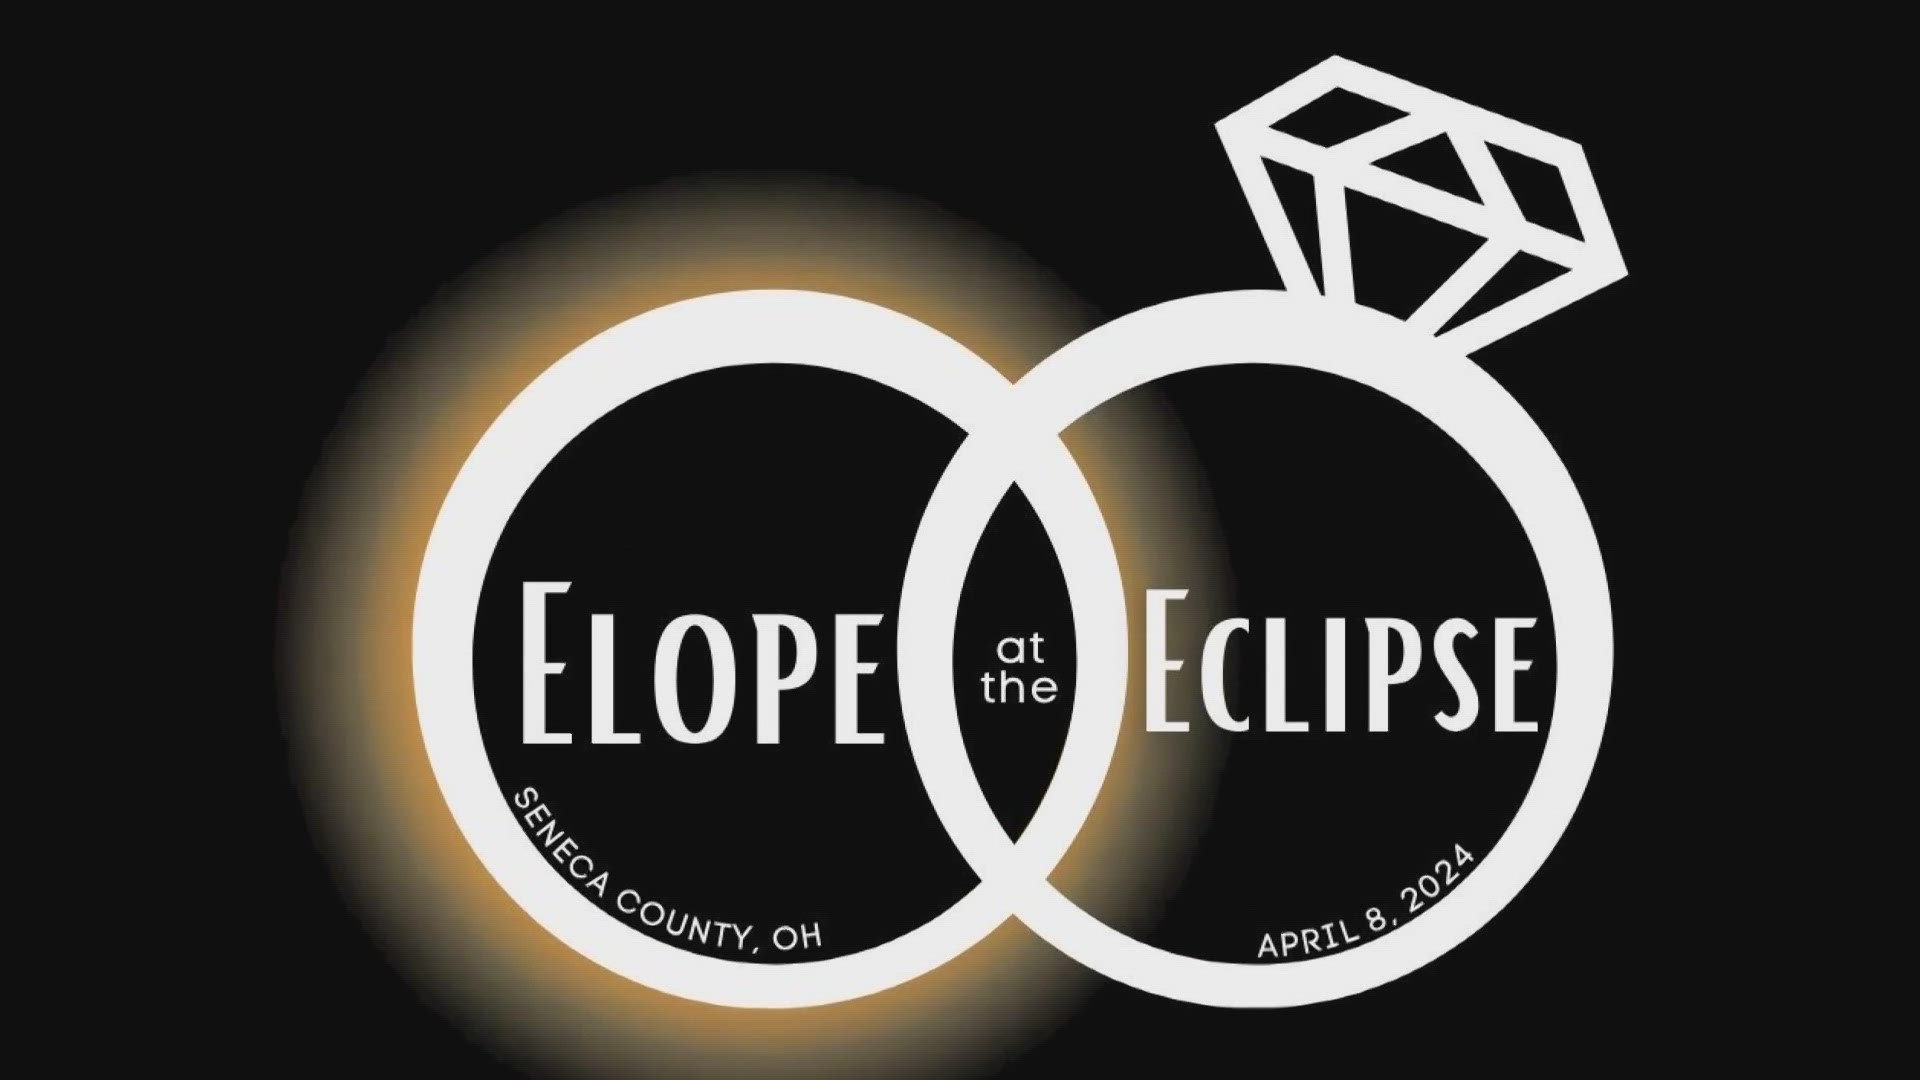 The free event will have couples saying "I do" during the three minutes of totality during the total solar eclipse on April 8.